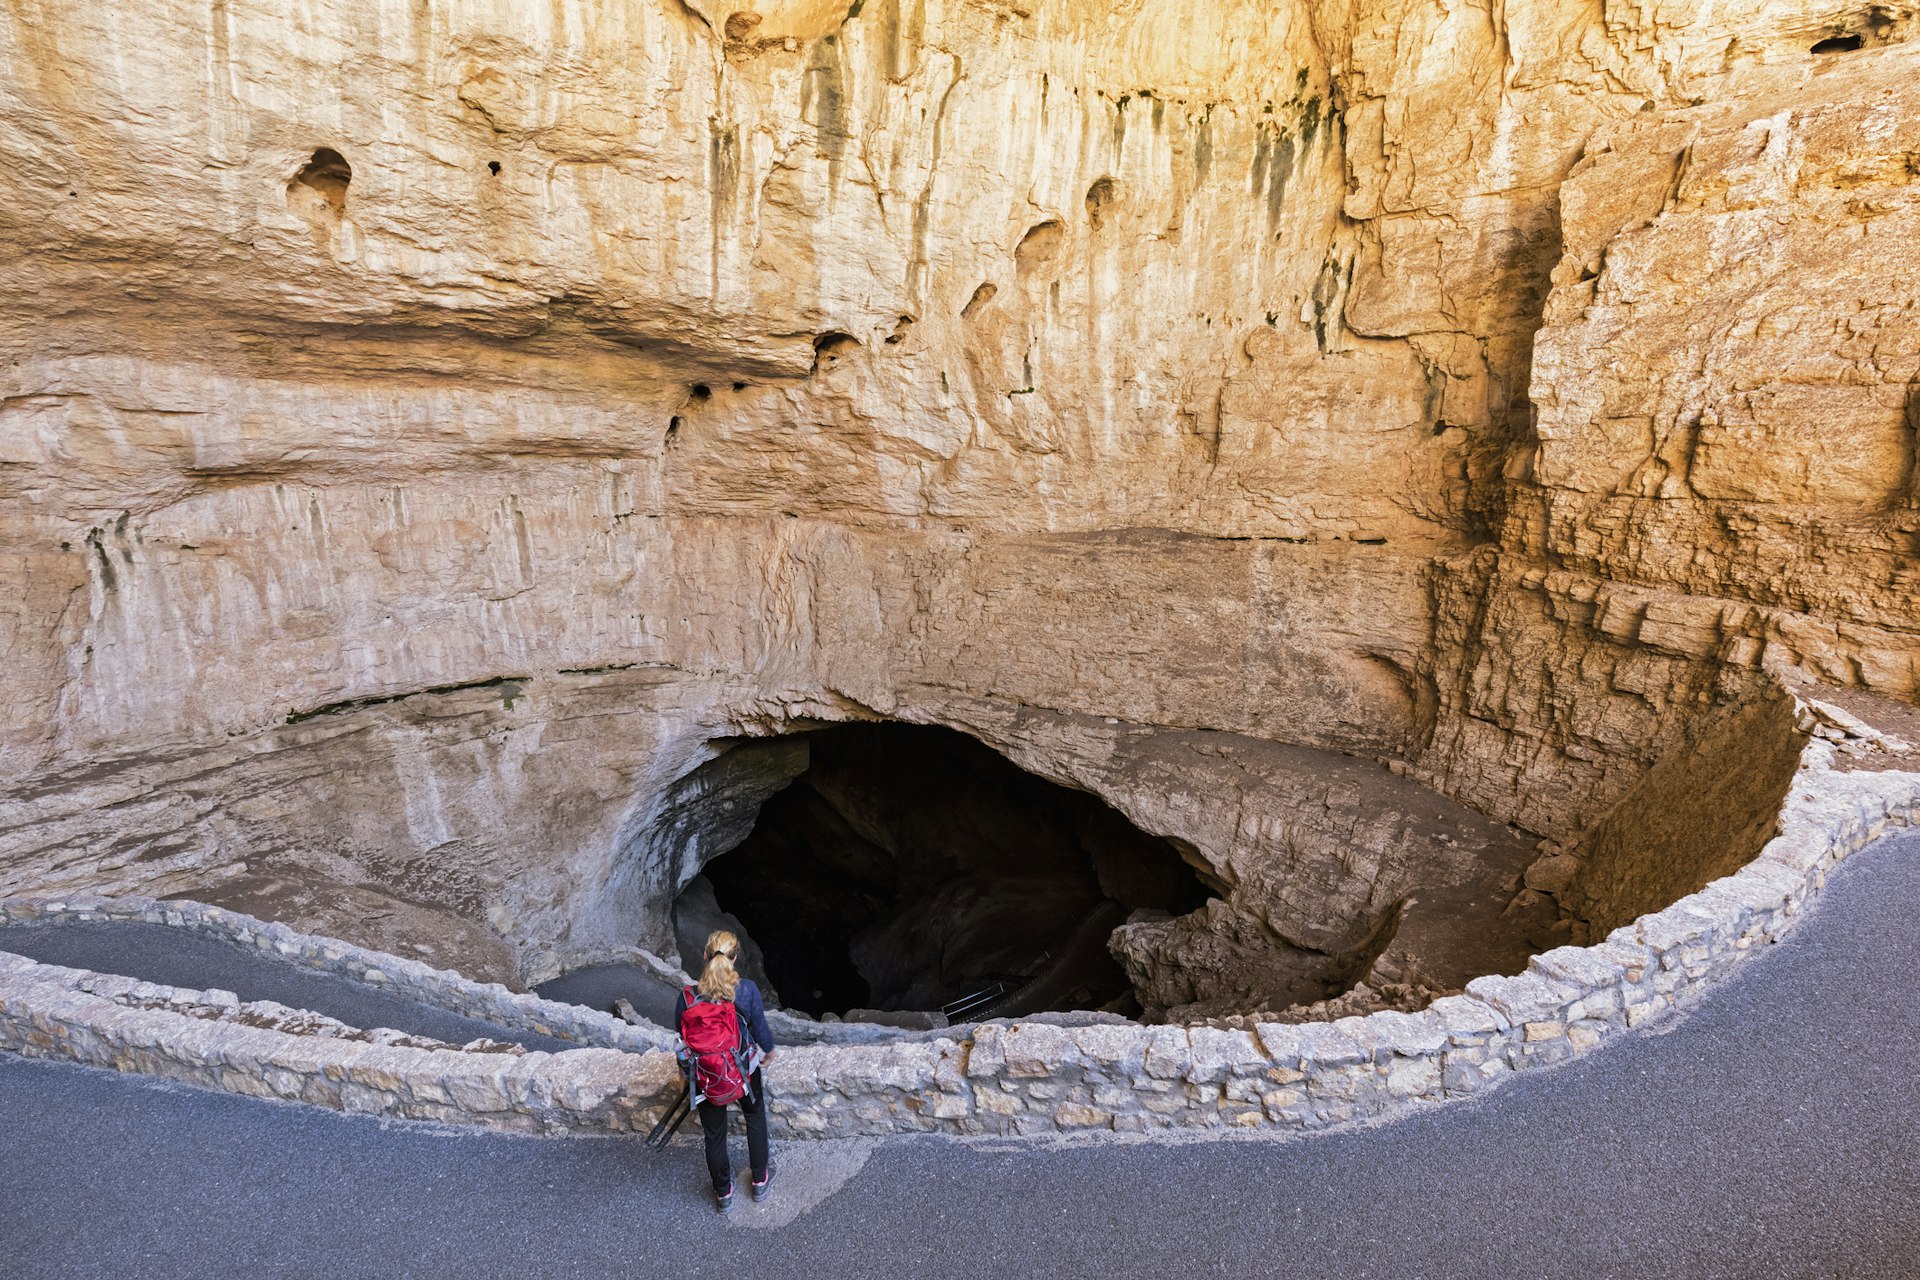 A female tourist stands at the entrance to a cave at Carlsbad Caverns National Park, New Mexico, USA